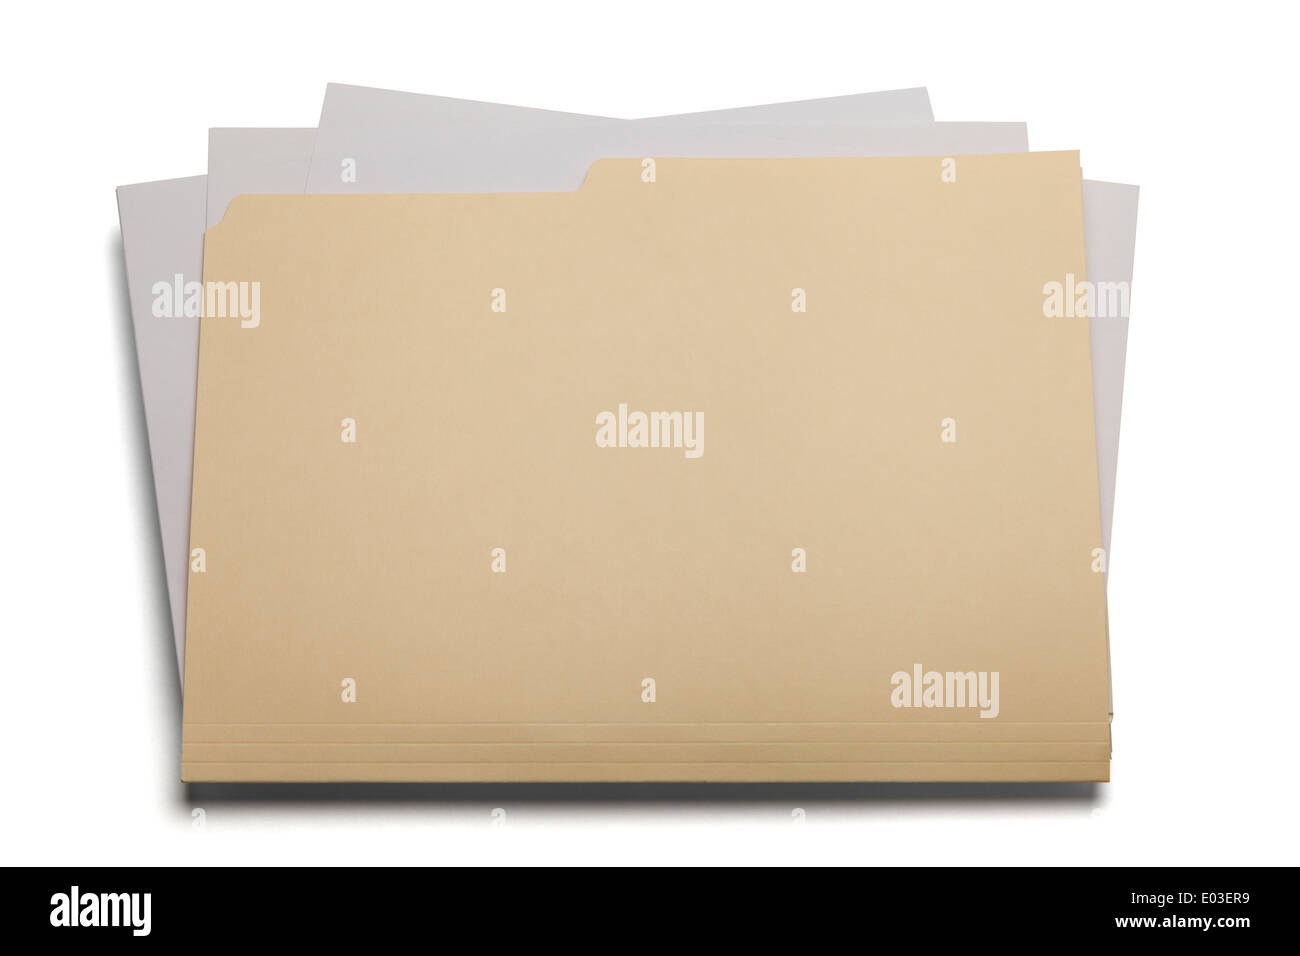 Blank file with papers stuffed inside isolated on a white background. Stock Photo